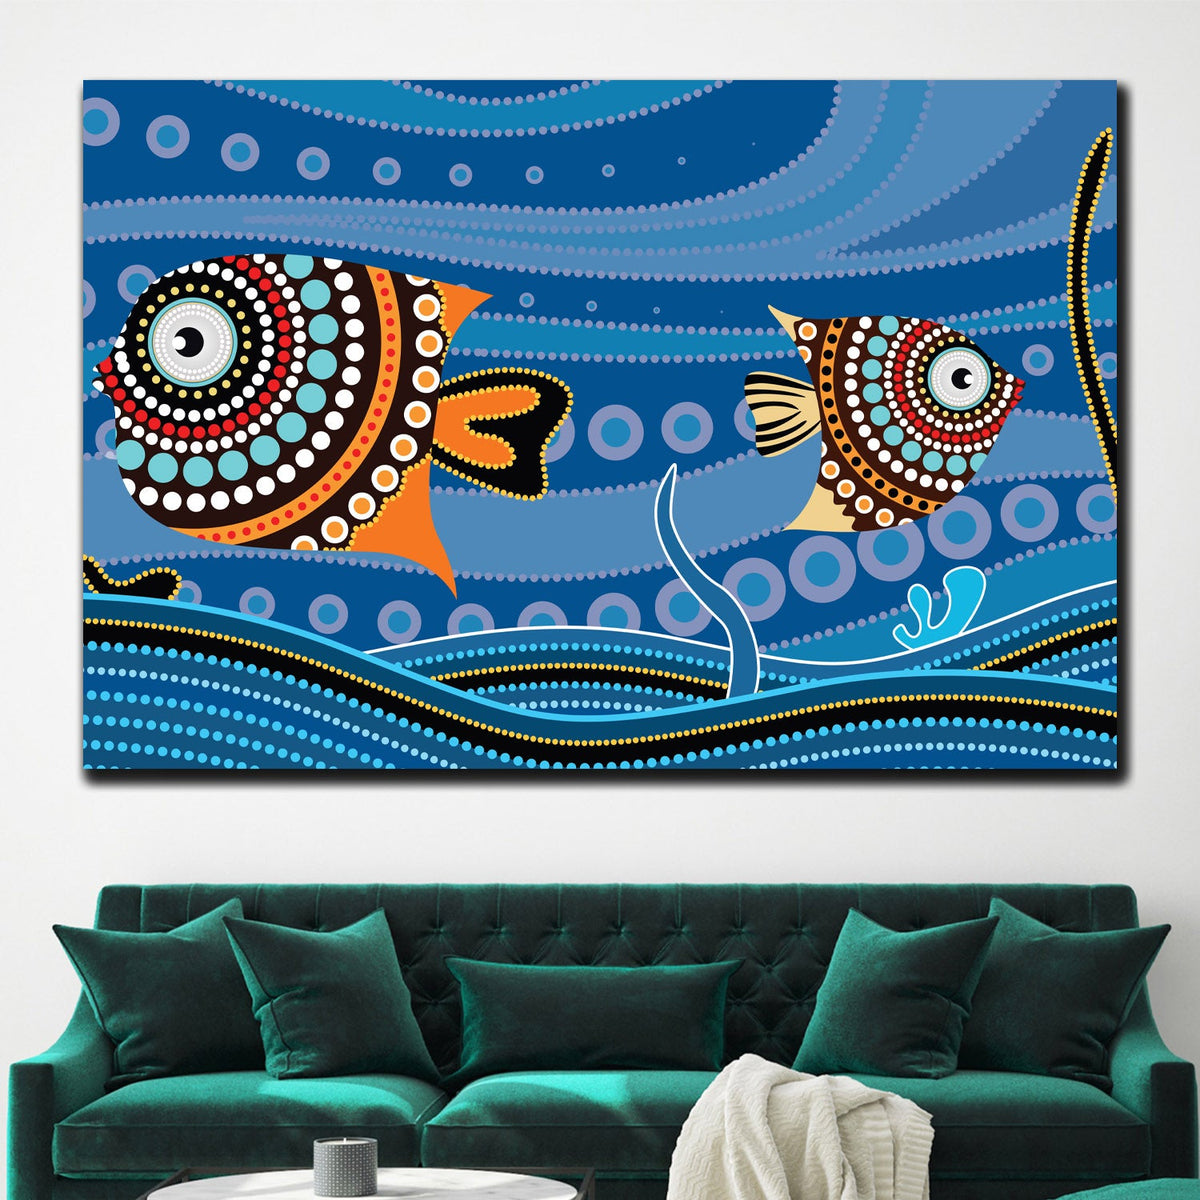 https://cdn.shopify.com/s/files/1/0387/9986/8044/products/FishintheSeaCanvasArtprintStretched-3.jpg